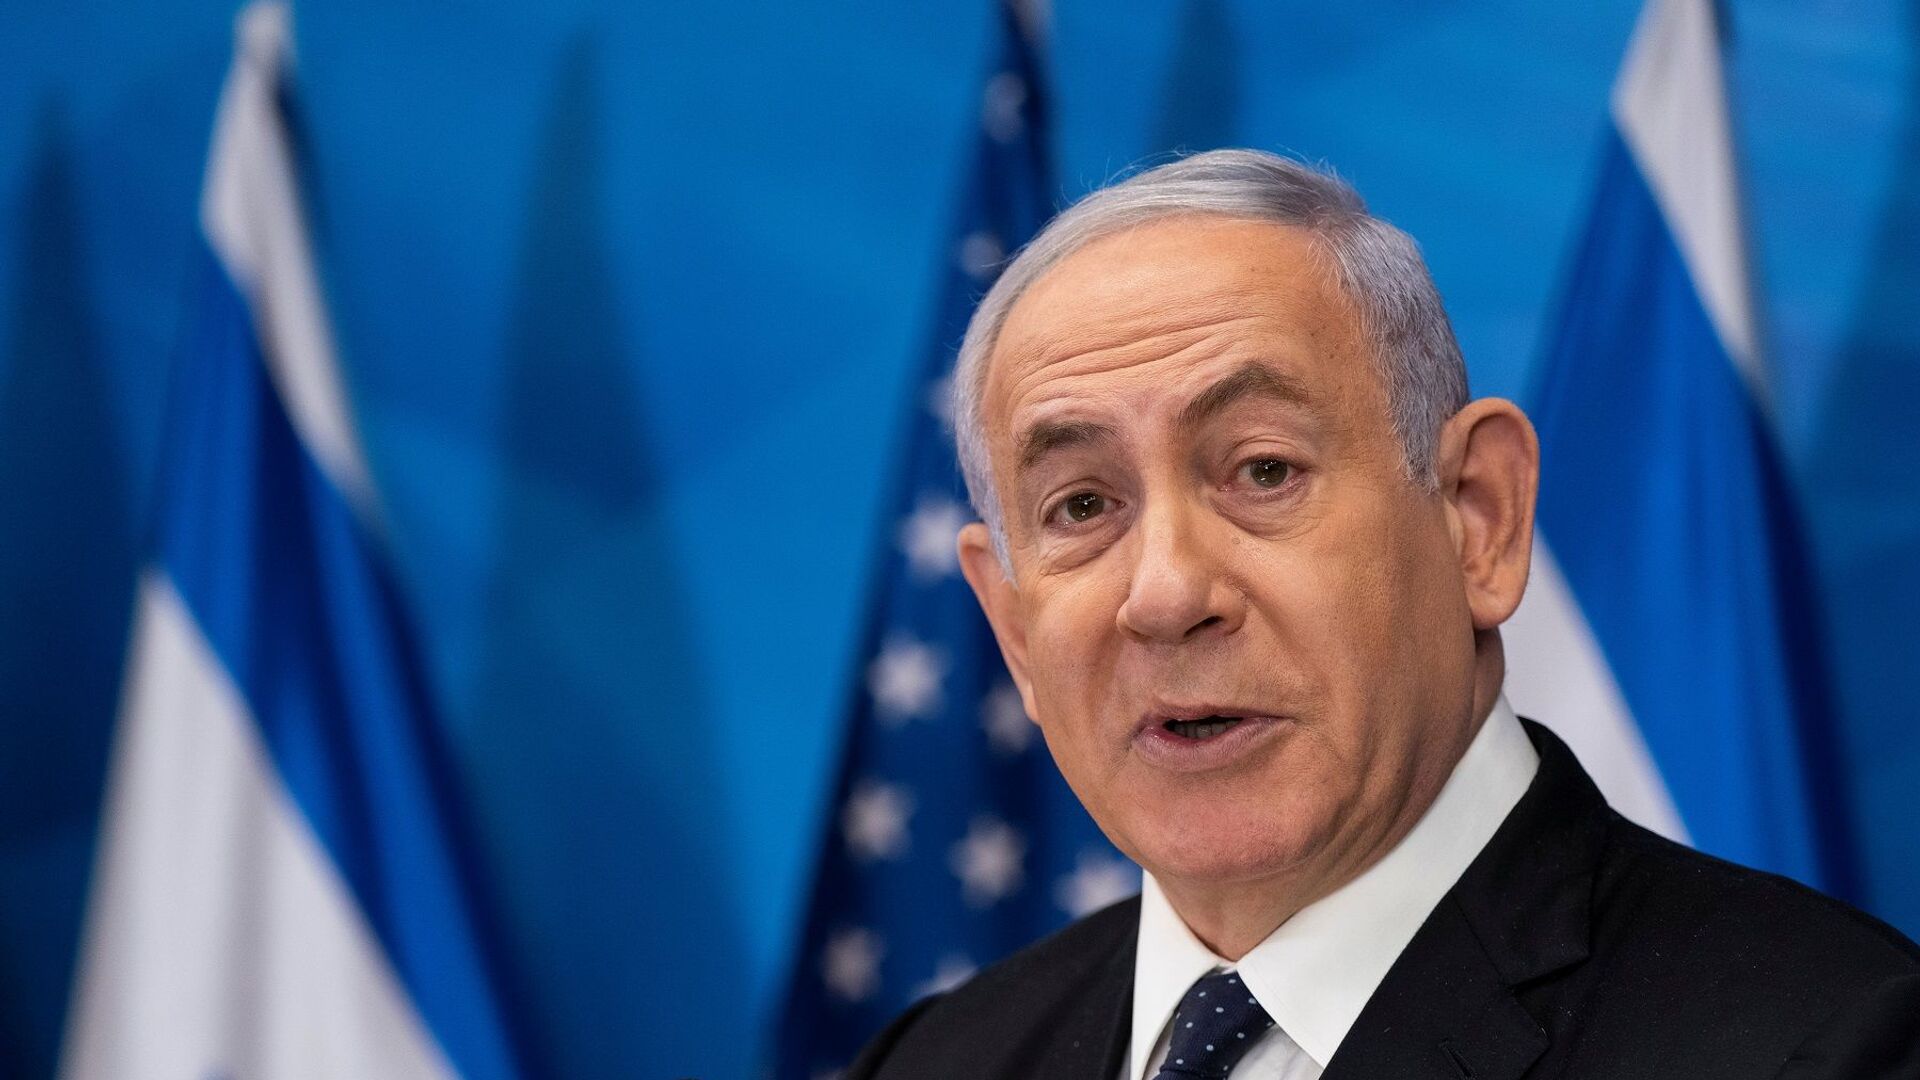 In fact, he had studied architecture, even served as a commando: Who is Benjamin Netanyahu?